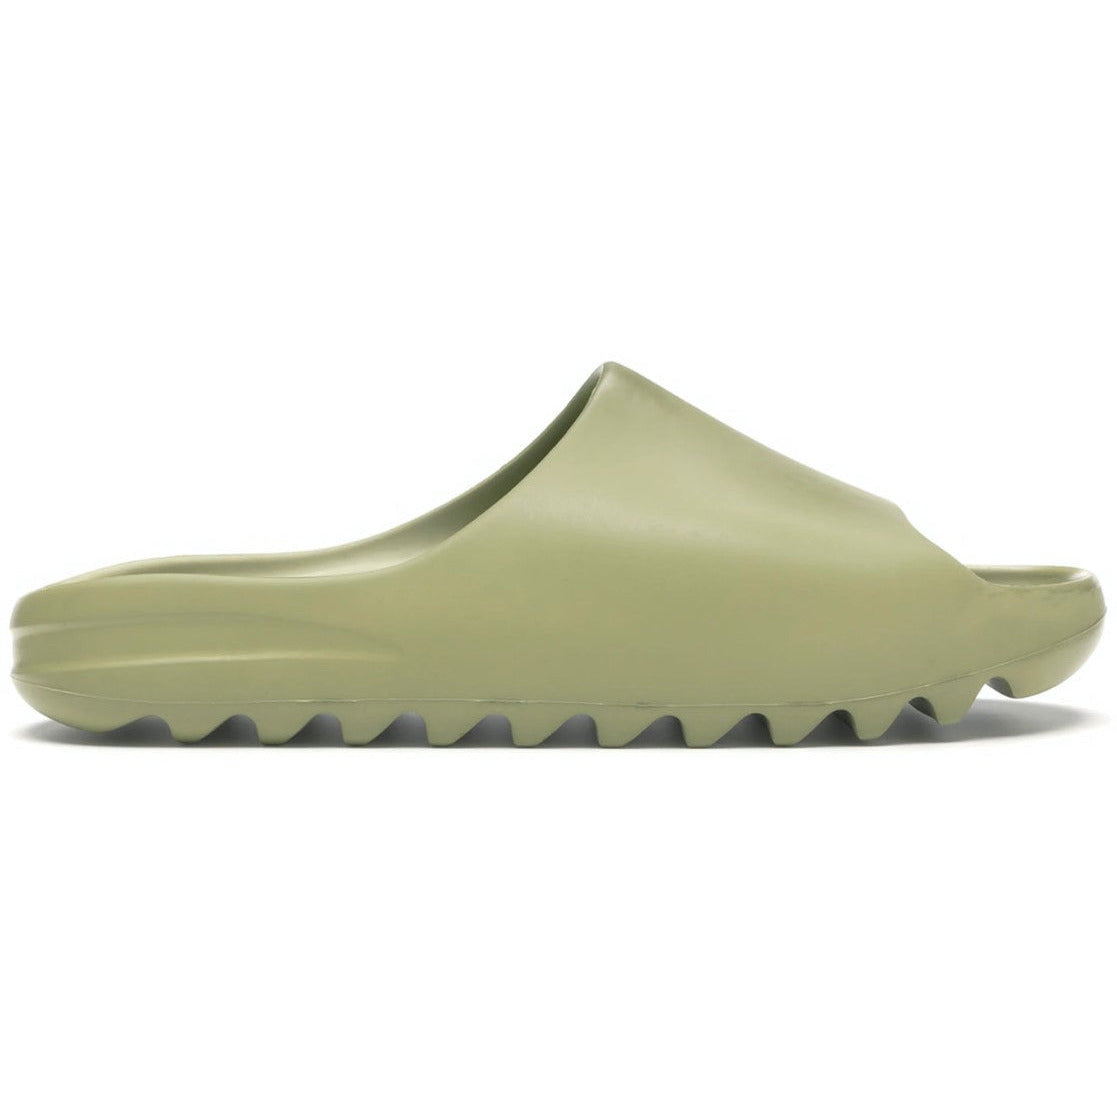 ADIDAS - Yeezy Slide "Resin 2022" - THE GAME